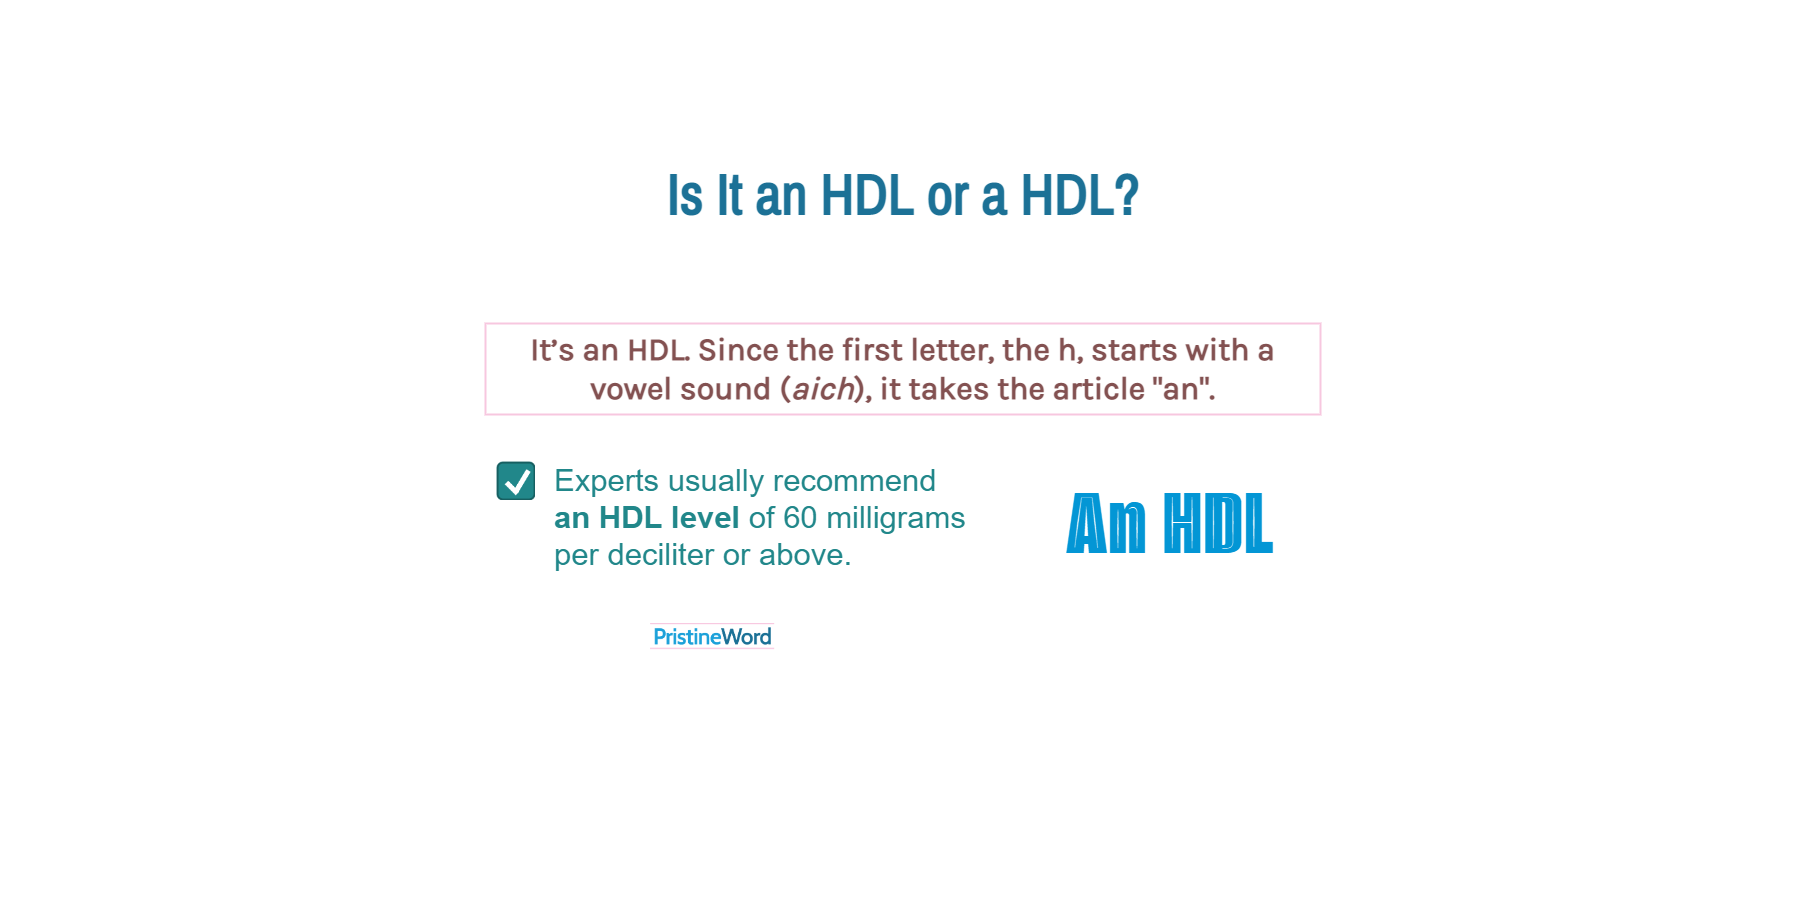 Is It an HDL or a HDL?